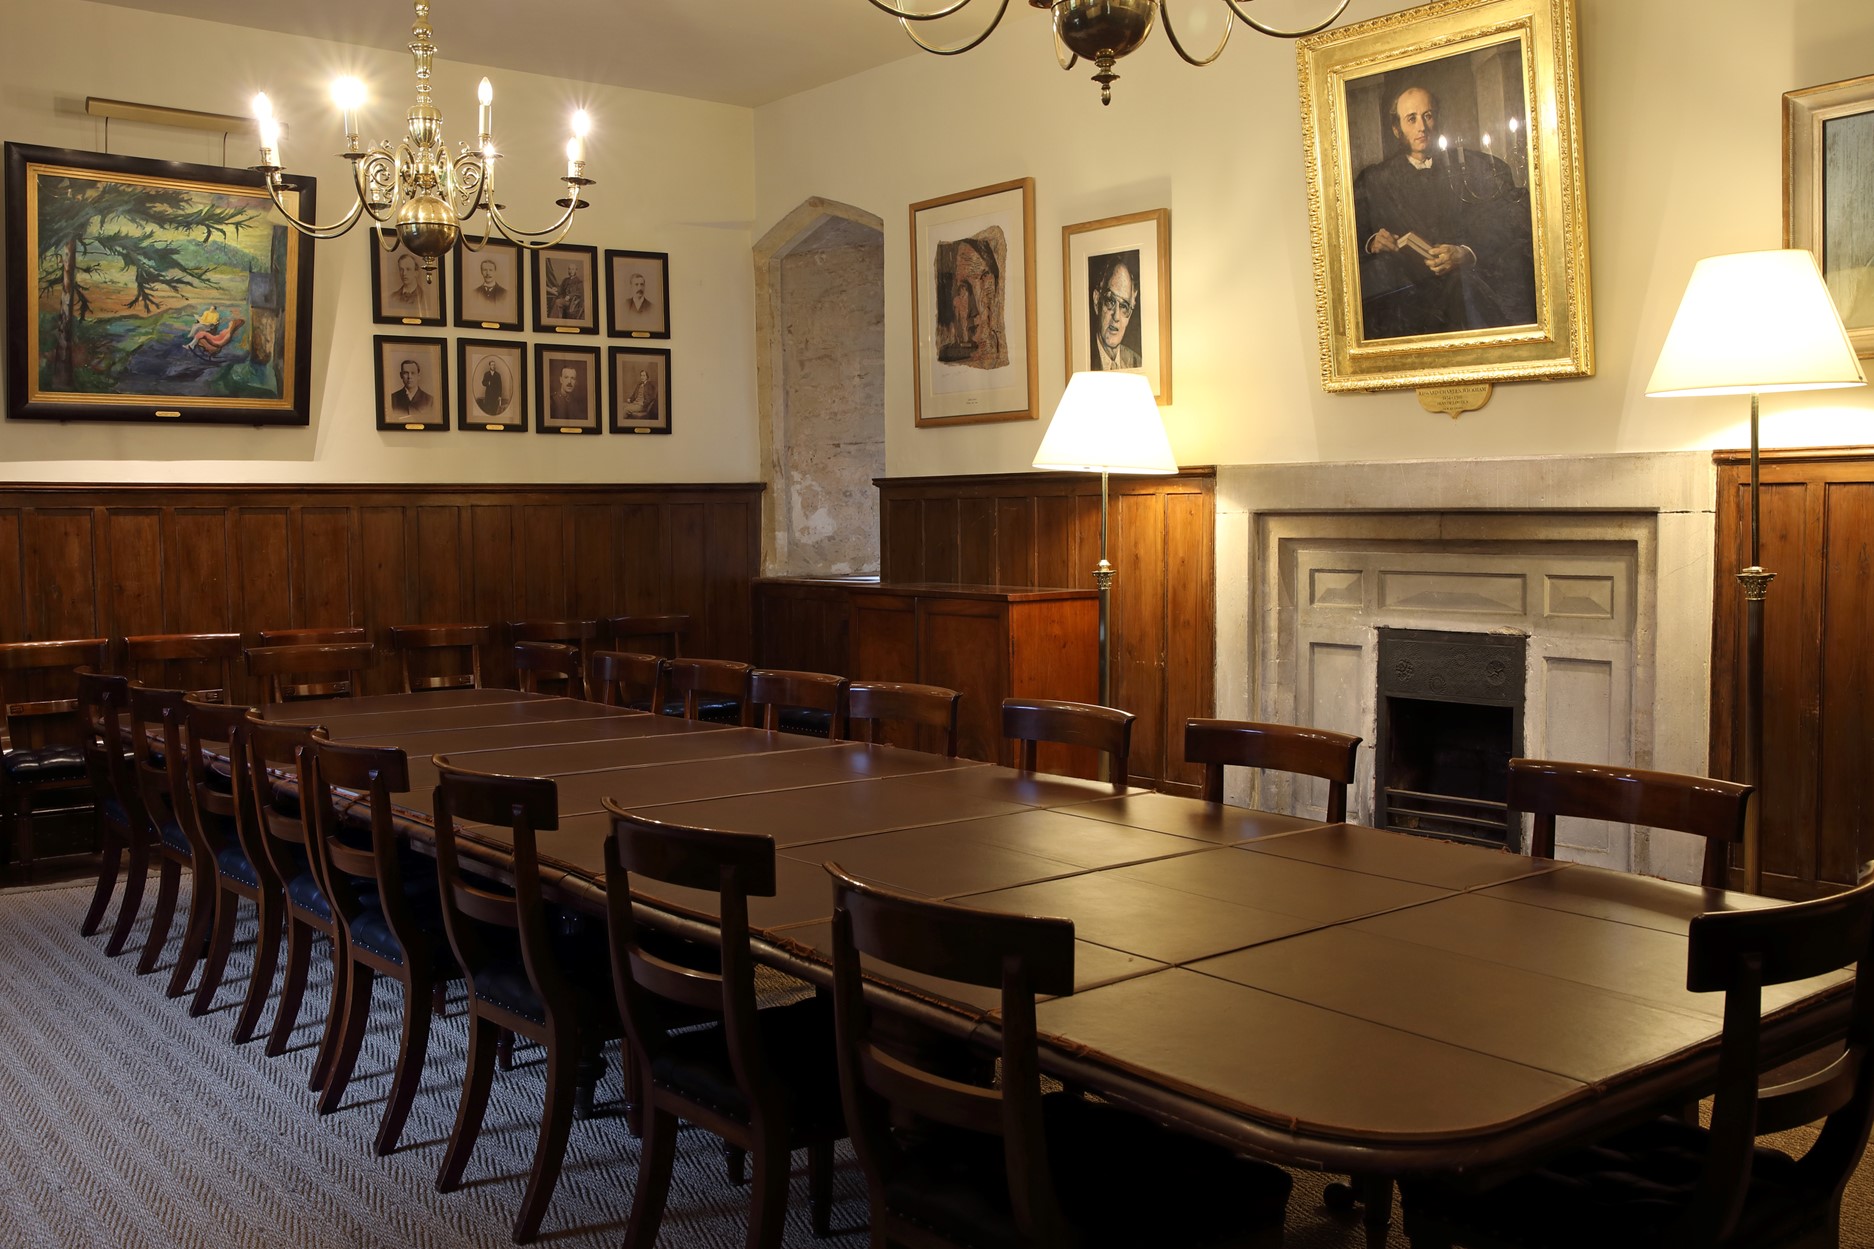 The Conduit Room - a meeting room with pictures hanging around the walls